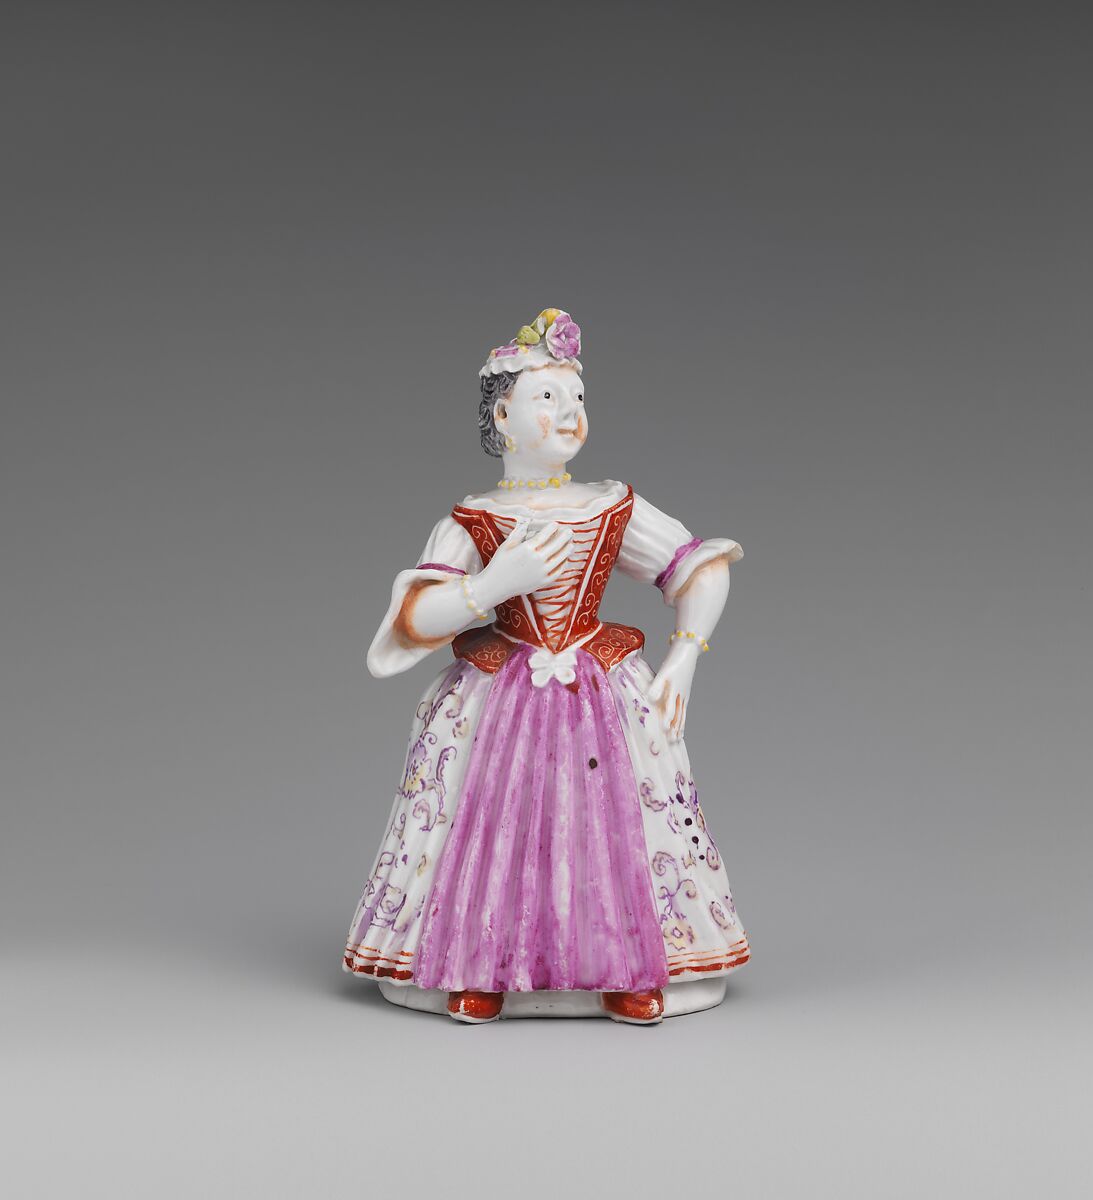 Table Bell in the Form of a Chambermaid, Vienna, Hard-paste porcelain, Austrian, Vienna 